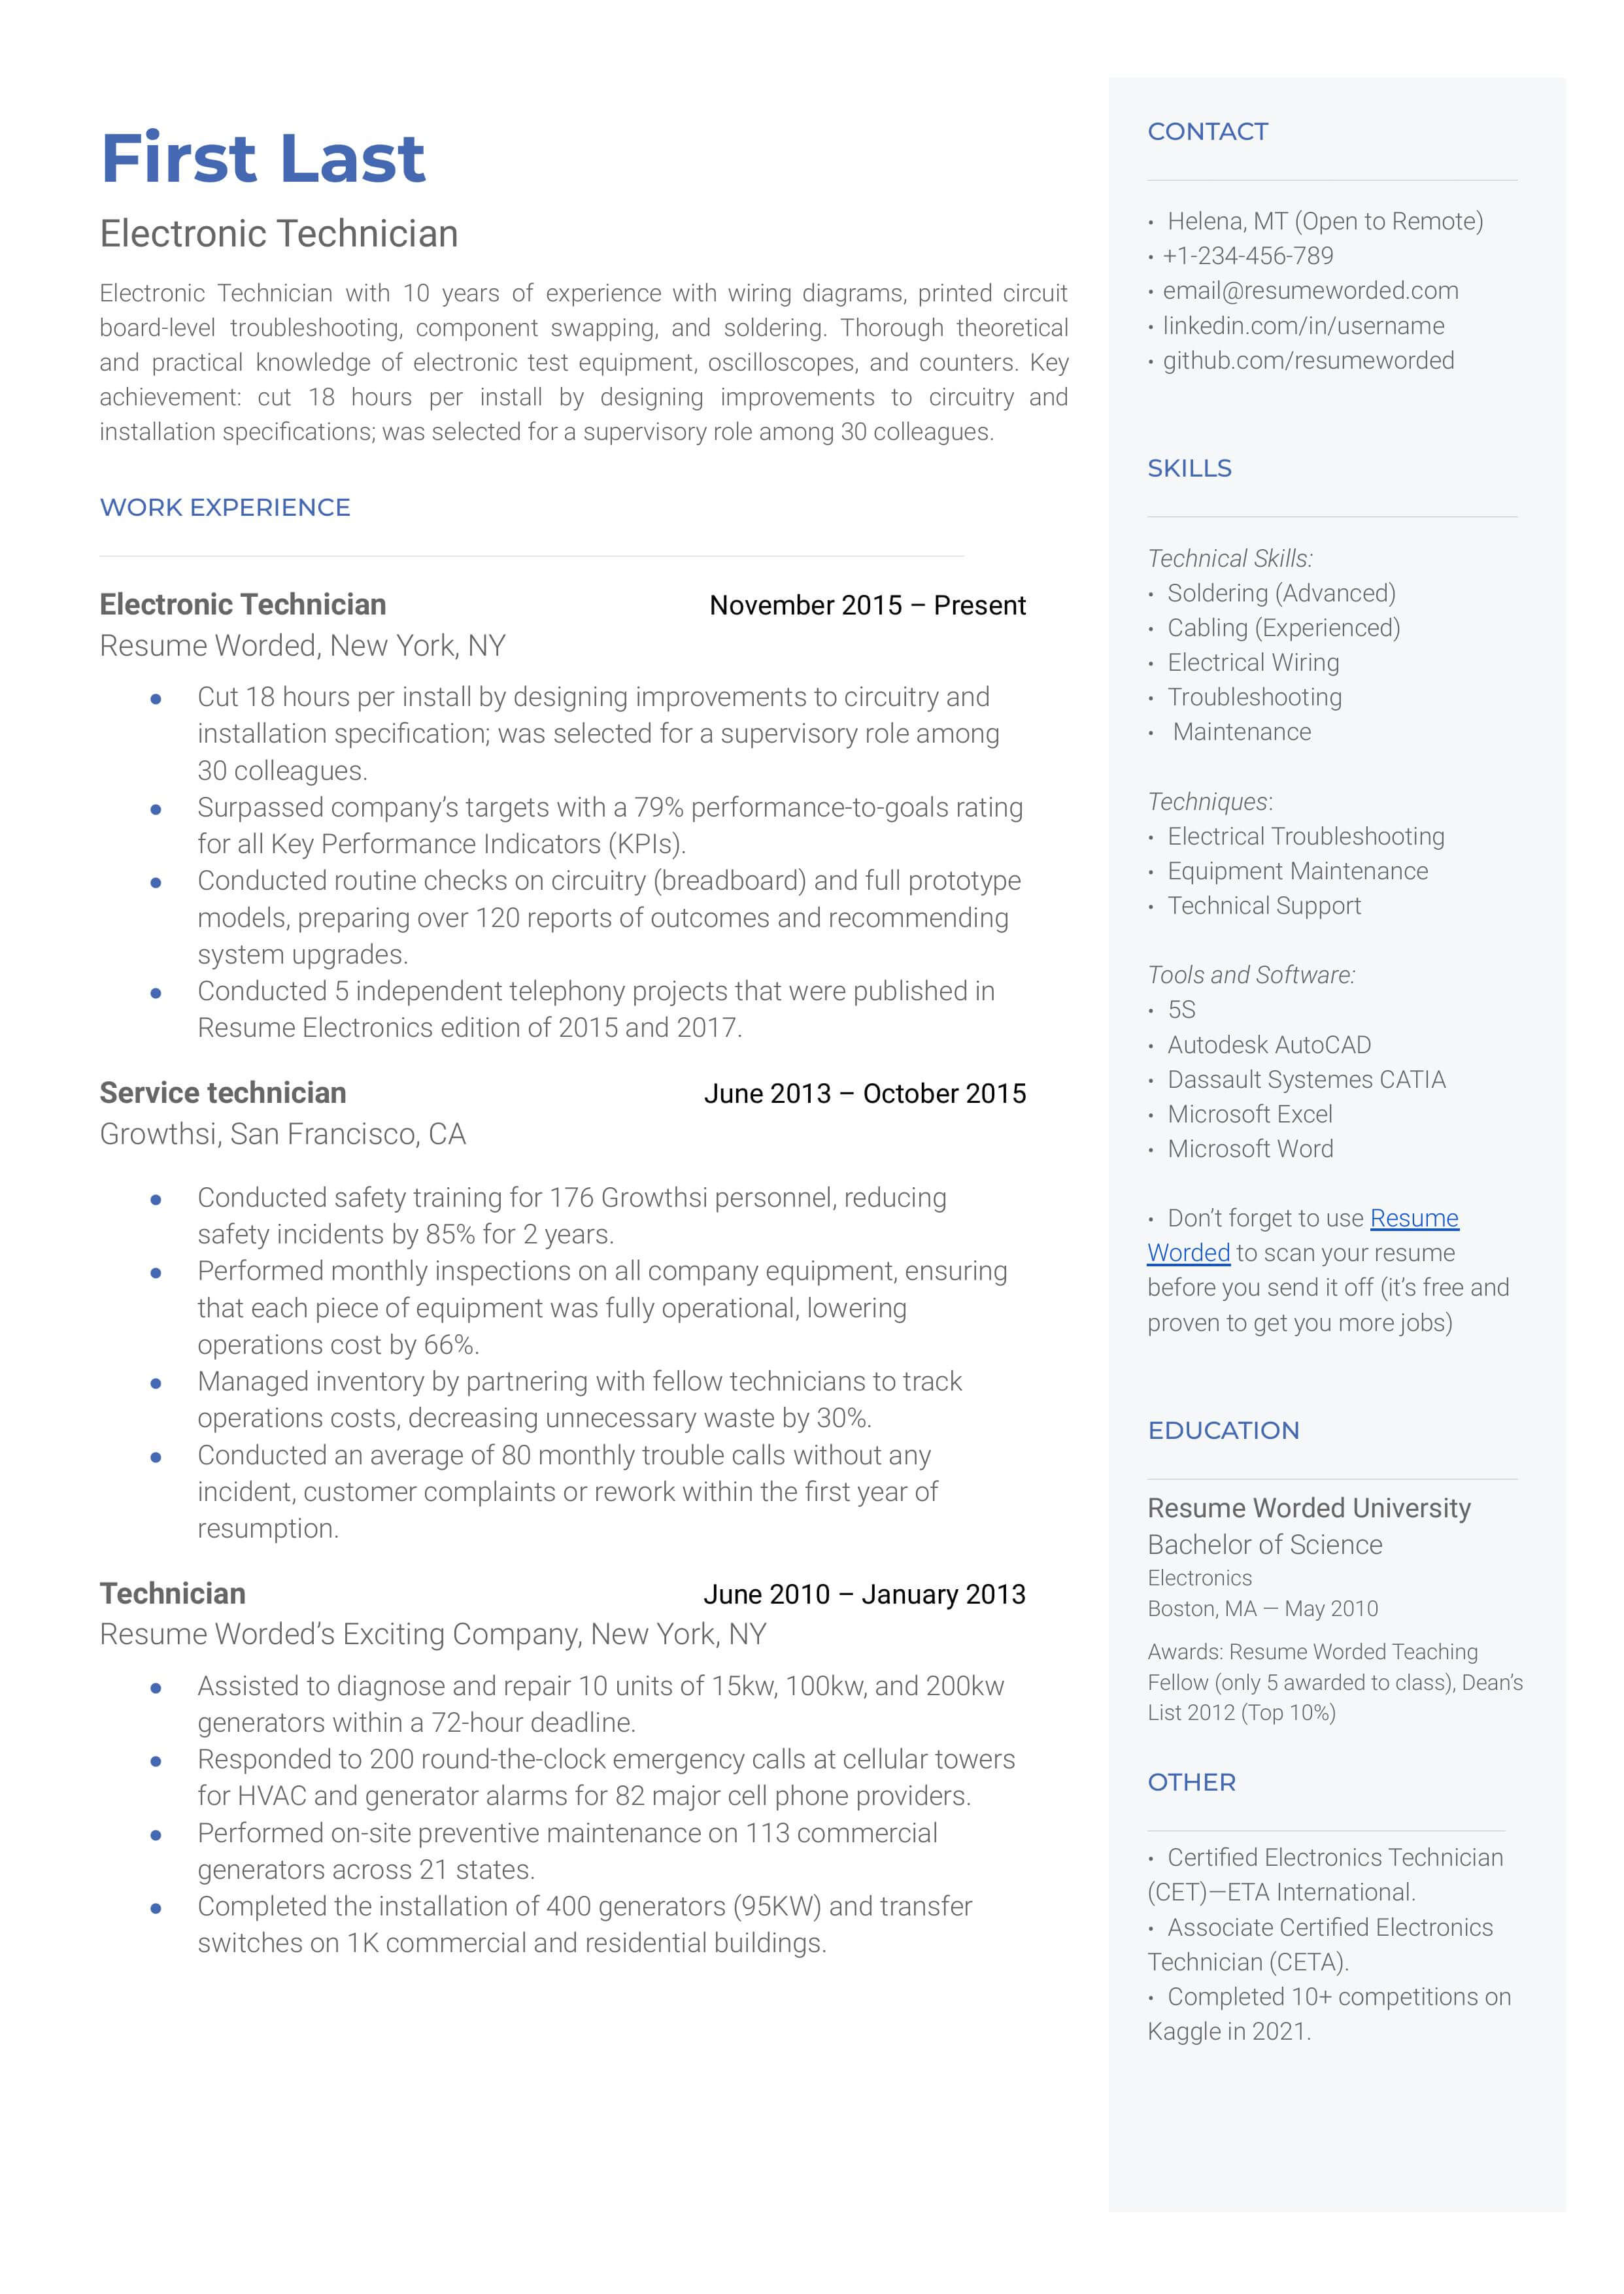 Electronic technician resume sample that highlights the applicant's certification and extensive experience.